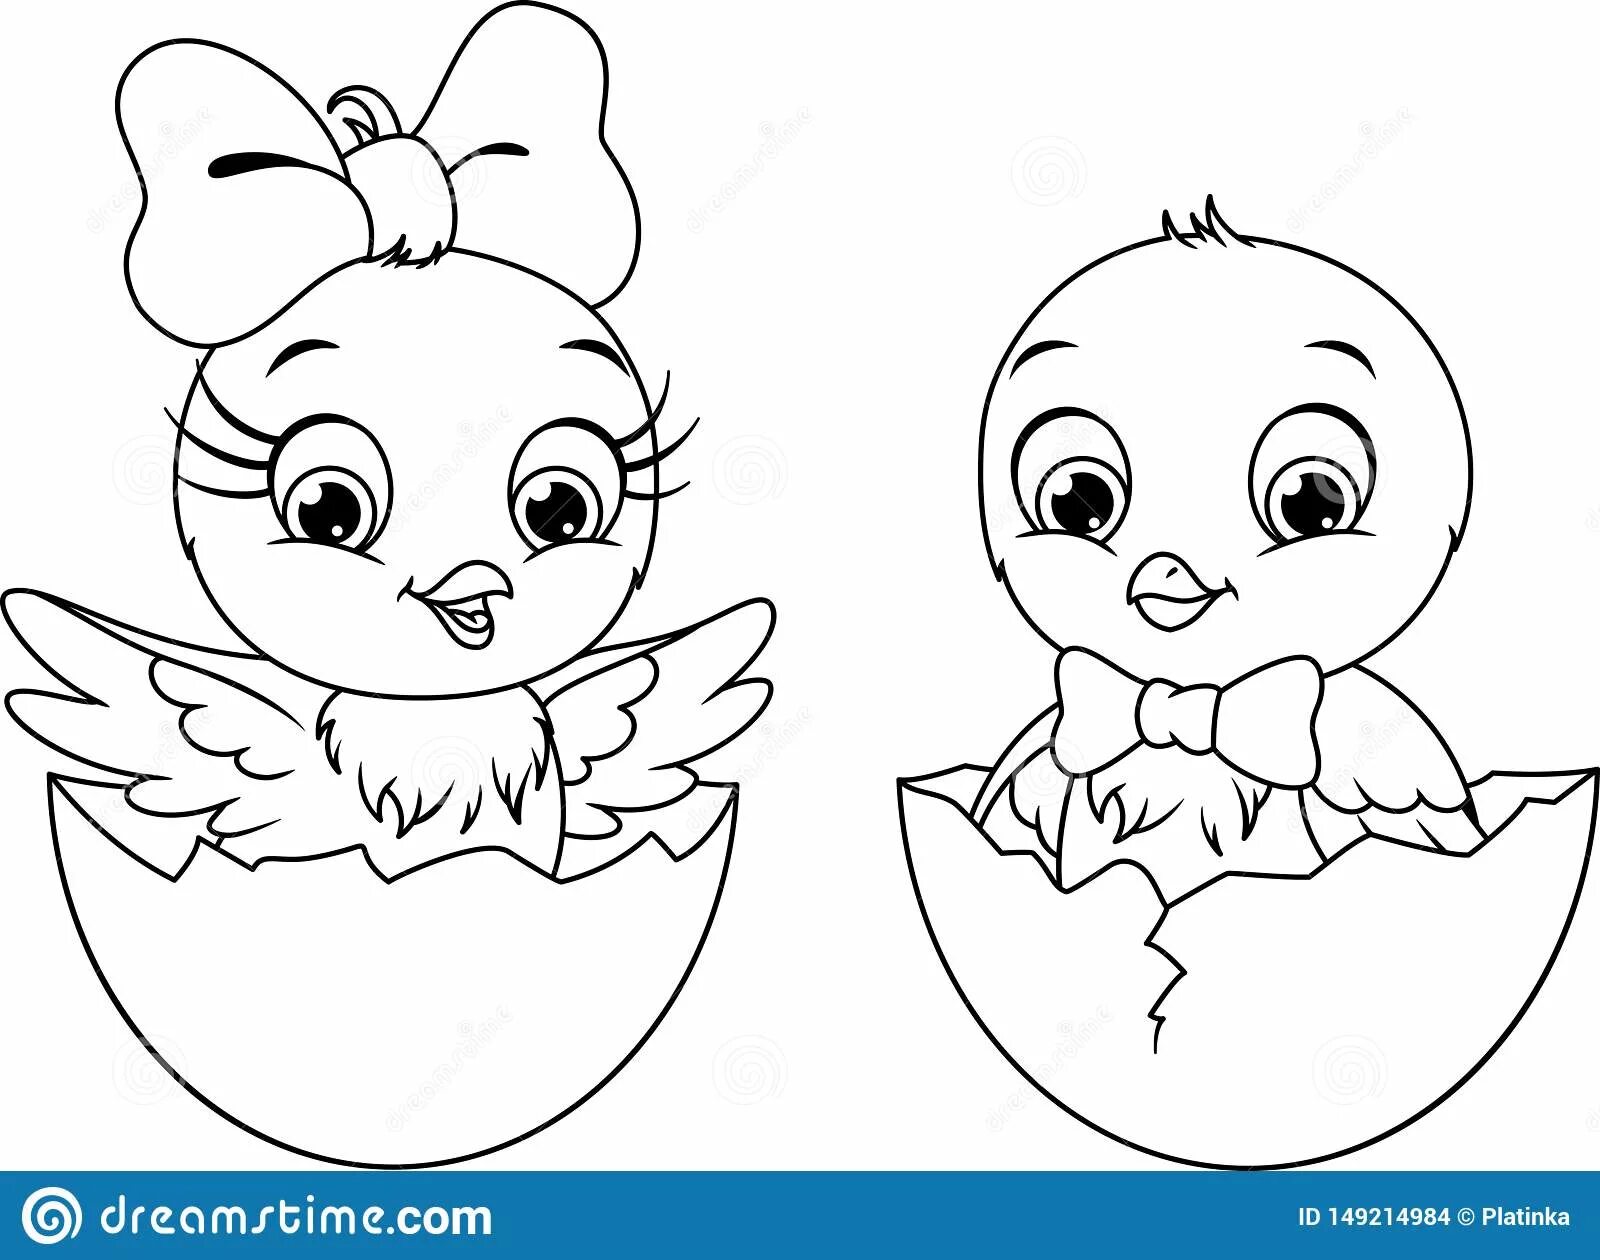 Coloring page loving chick in egg